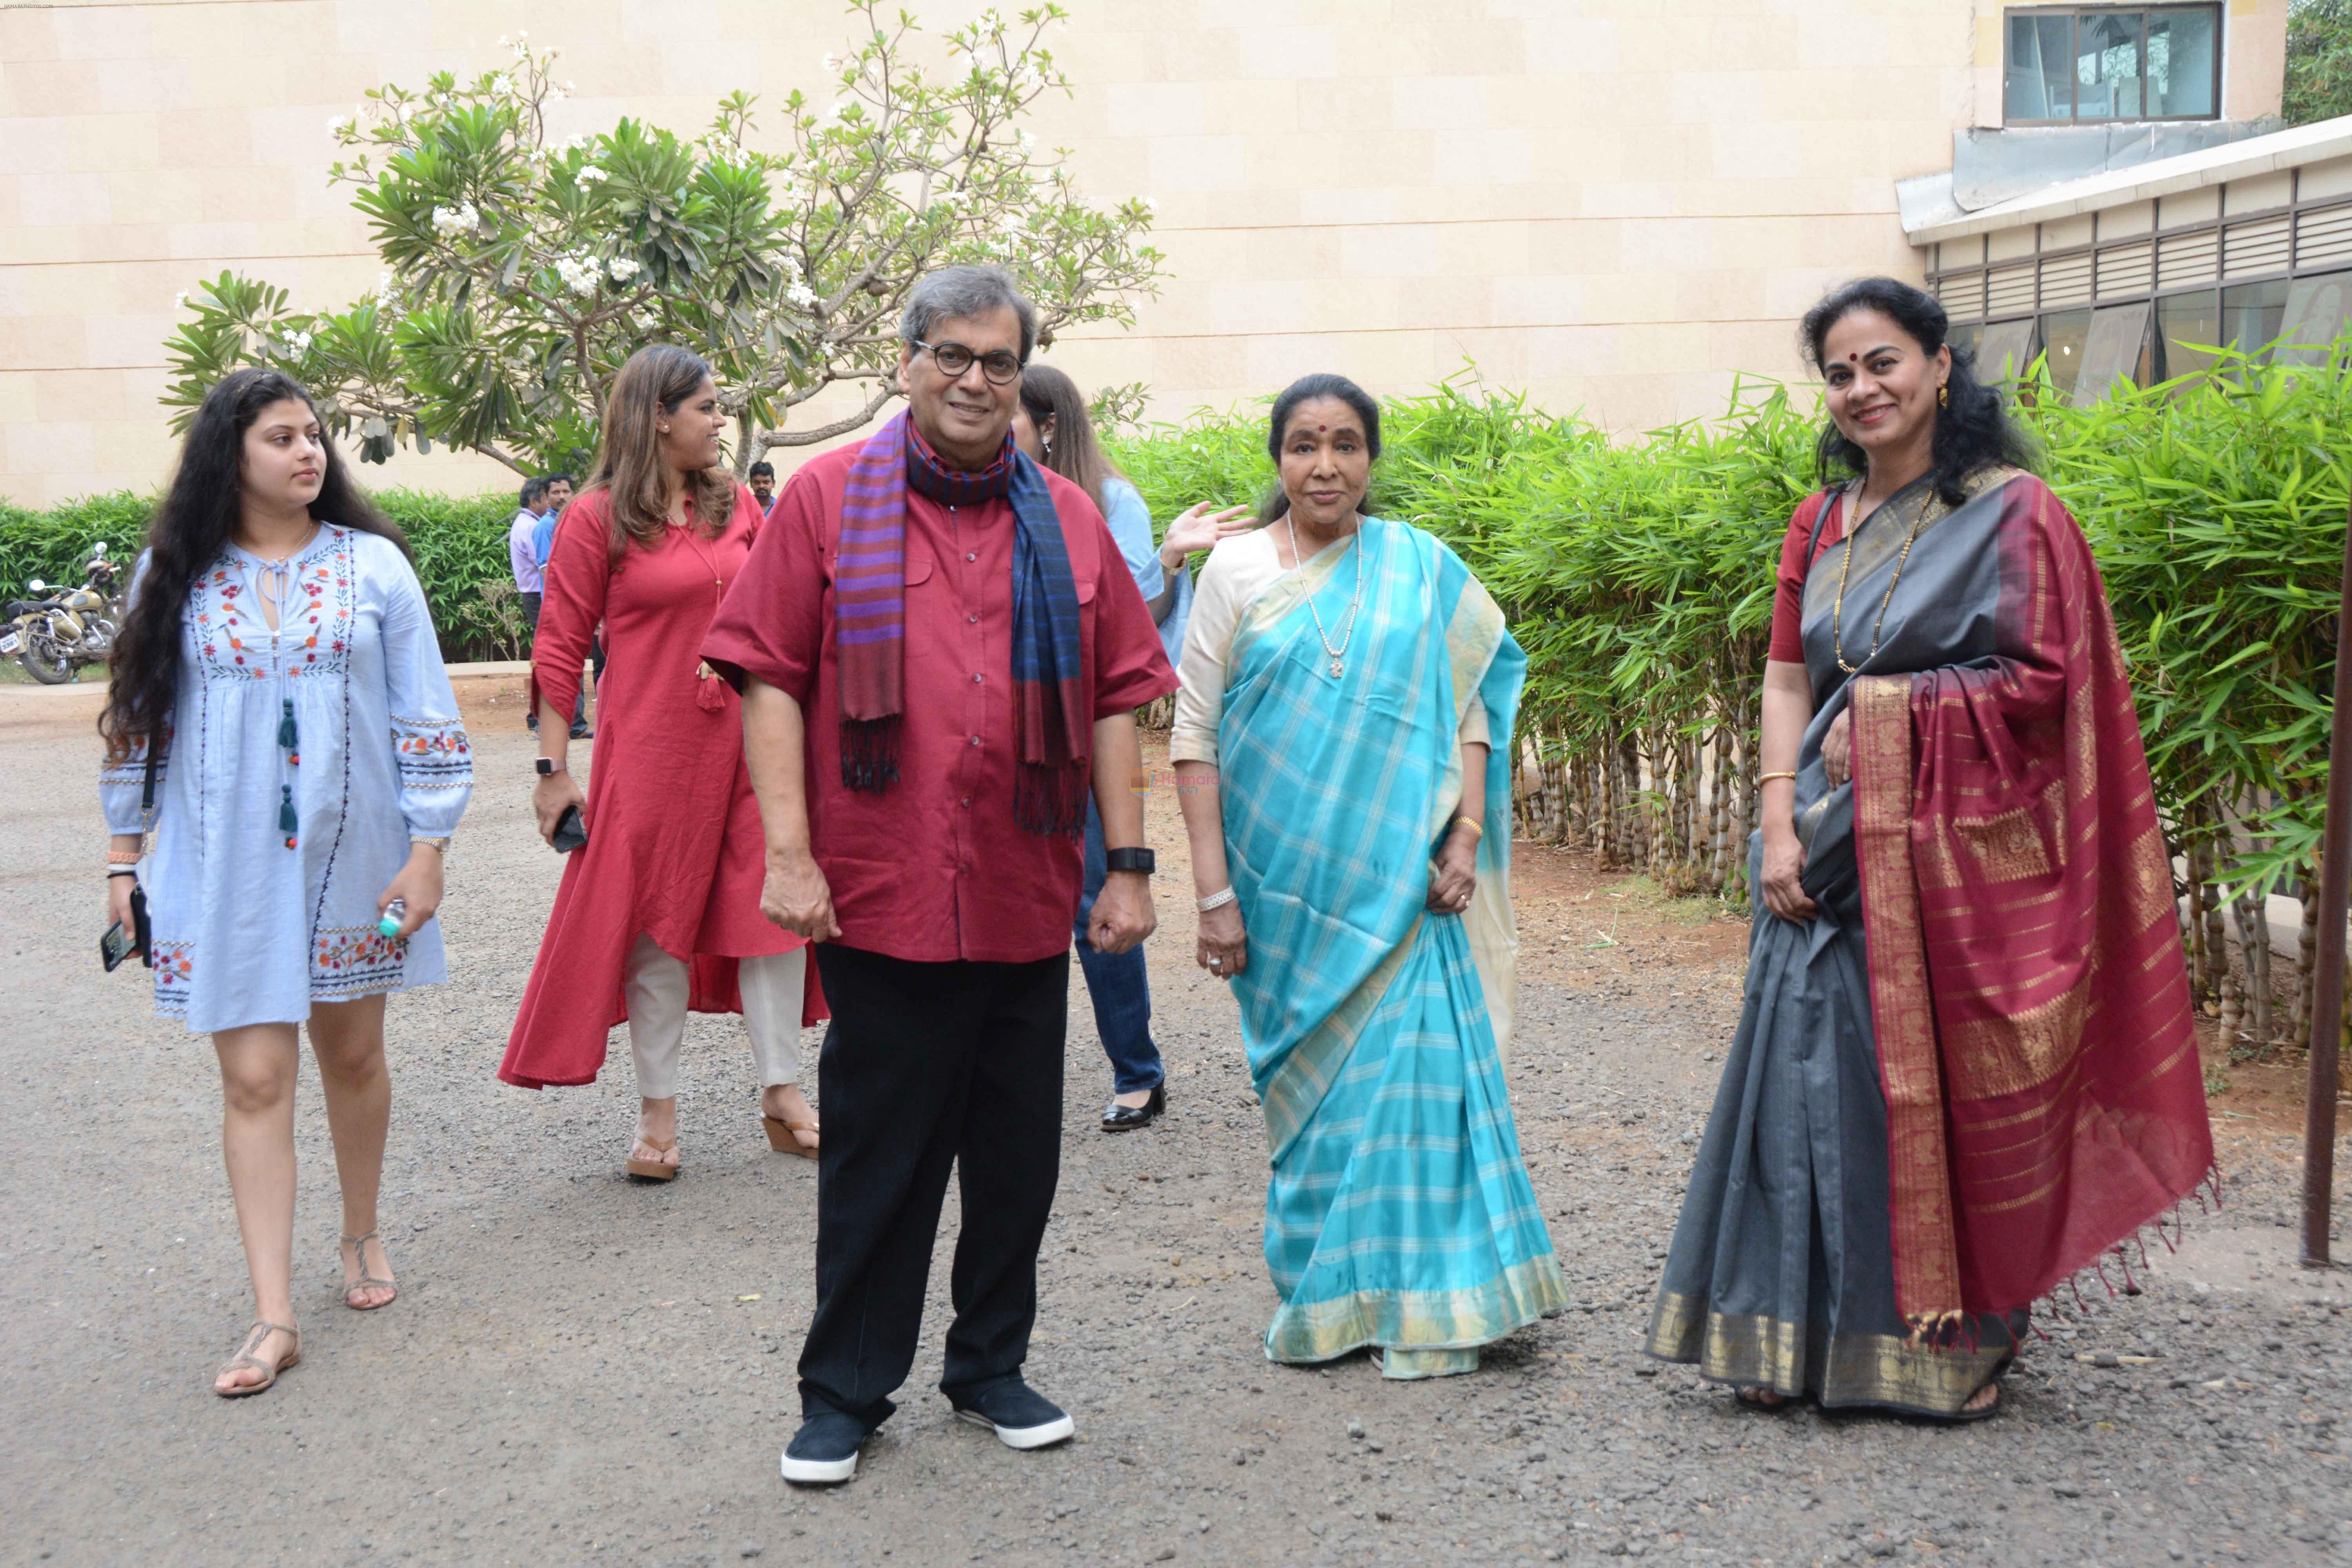 Asha Bhosle At Whistling Woods International For 5th Veda Session on 15th March 2018